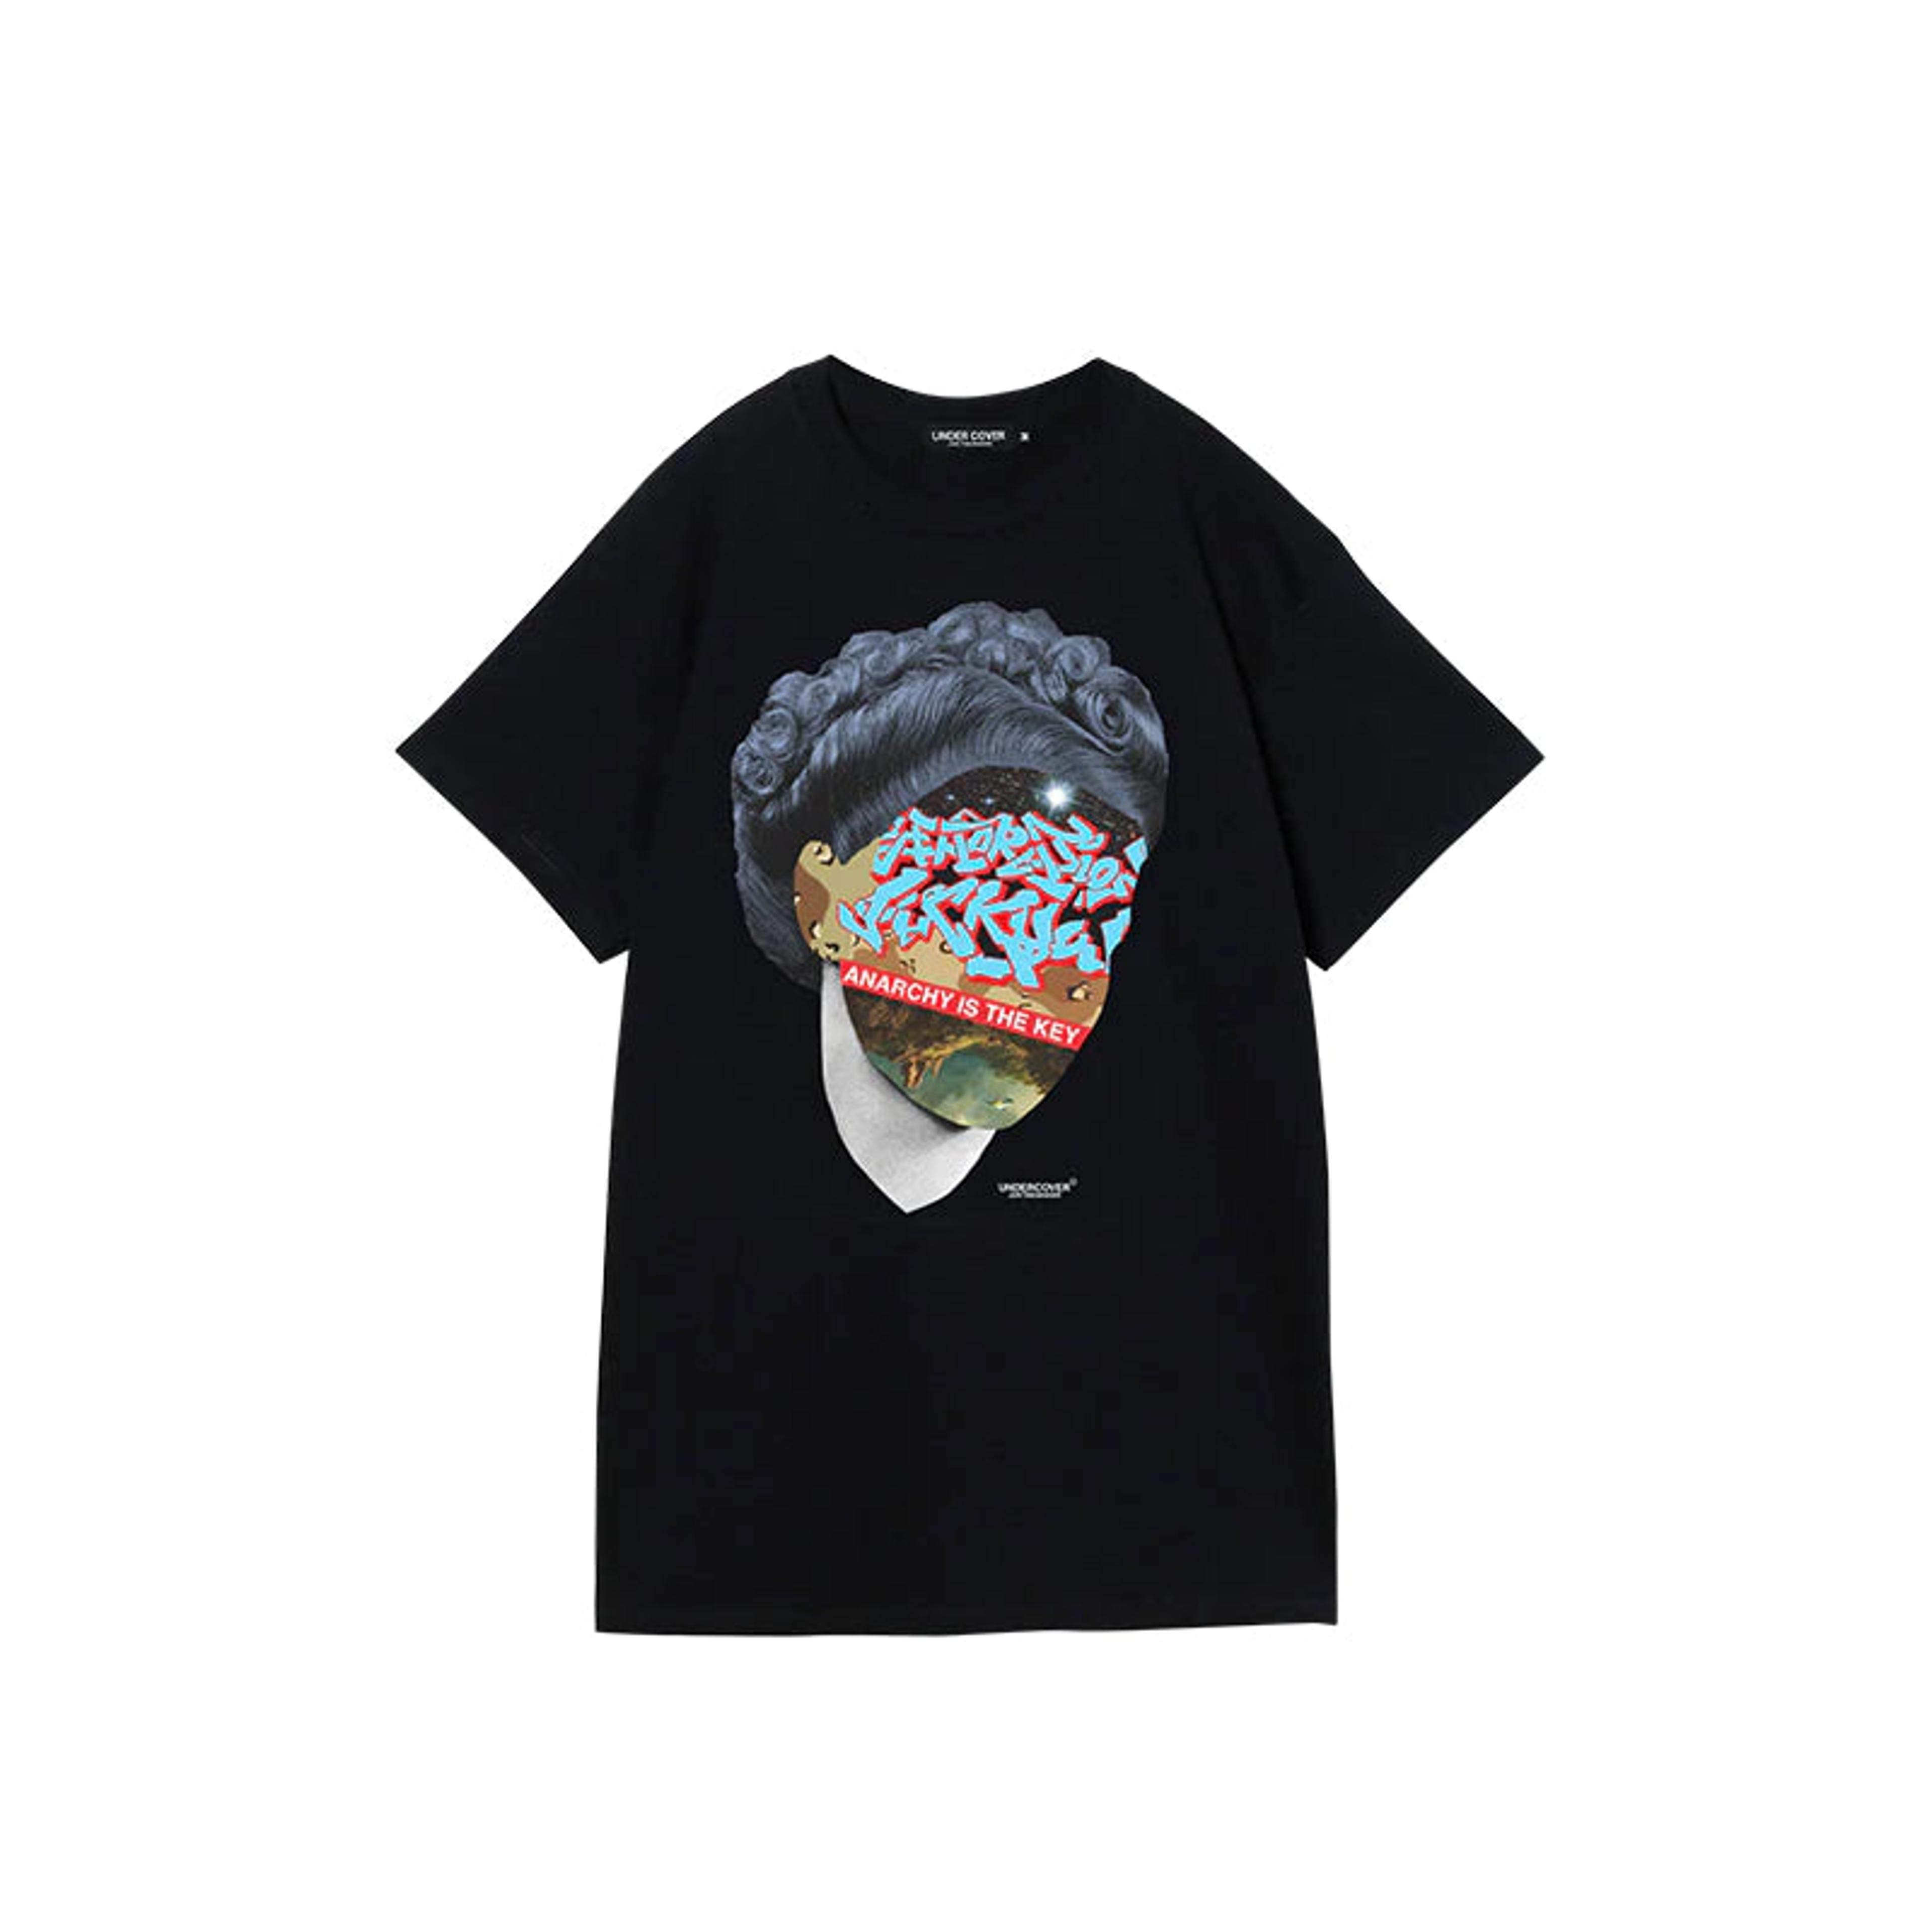 Alternate View 1 of Undercover - Tee Face GFY AITK - Black